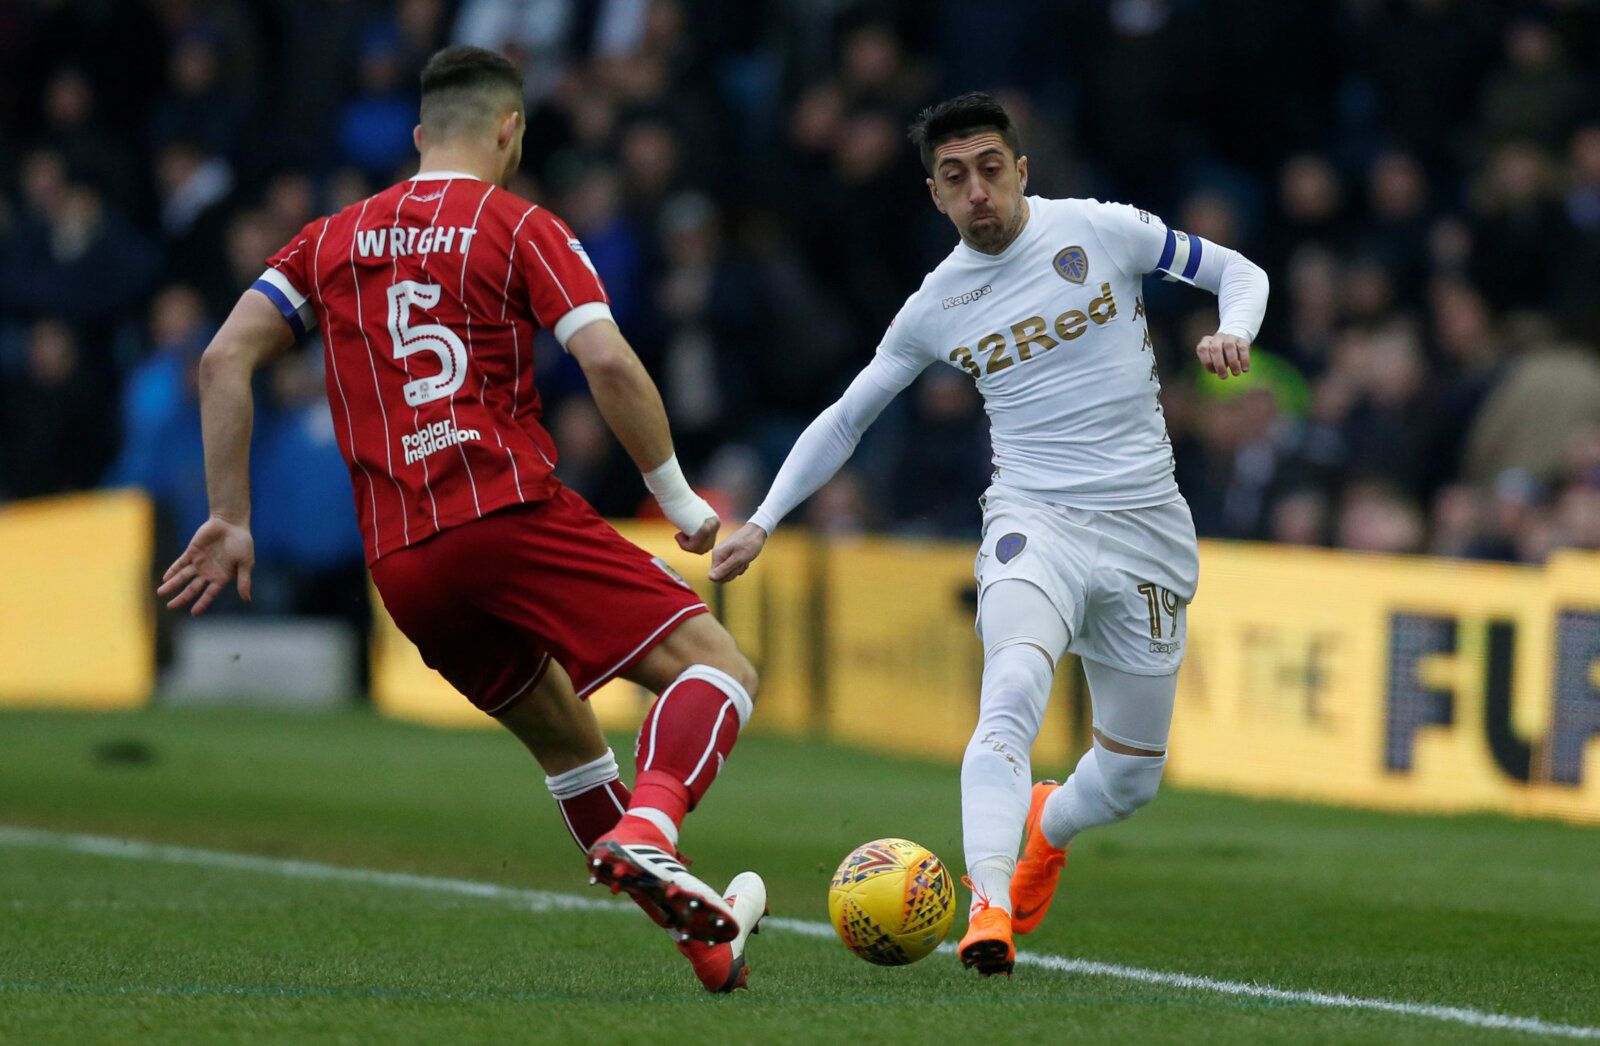 Soccer Football - Championship - Leeds United vs Bristol City - Elland Road, Leeds, Britain - February 18, 2018  Leeds United's Pablo Hernandez and Bristol City's Bailey Wright in action  Action Images/Ed Sykes  EDITORIAL USE ONLY. No use with unauthorized audio, video, data, fixture lists, club/league logos or 